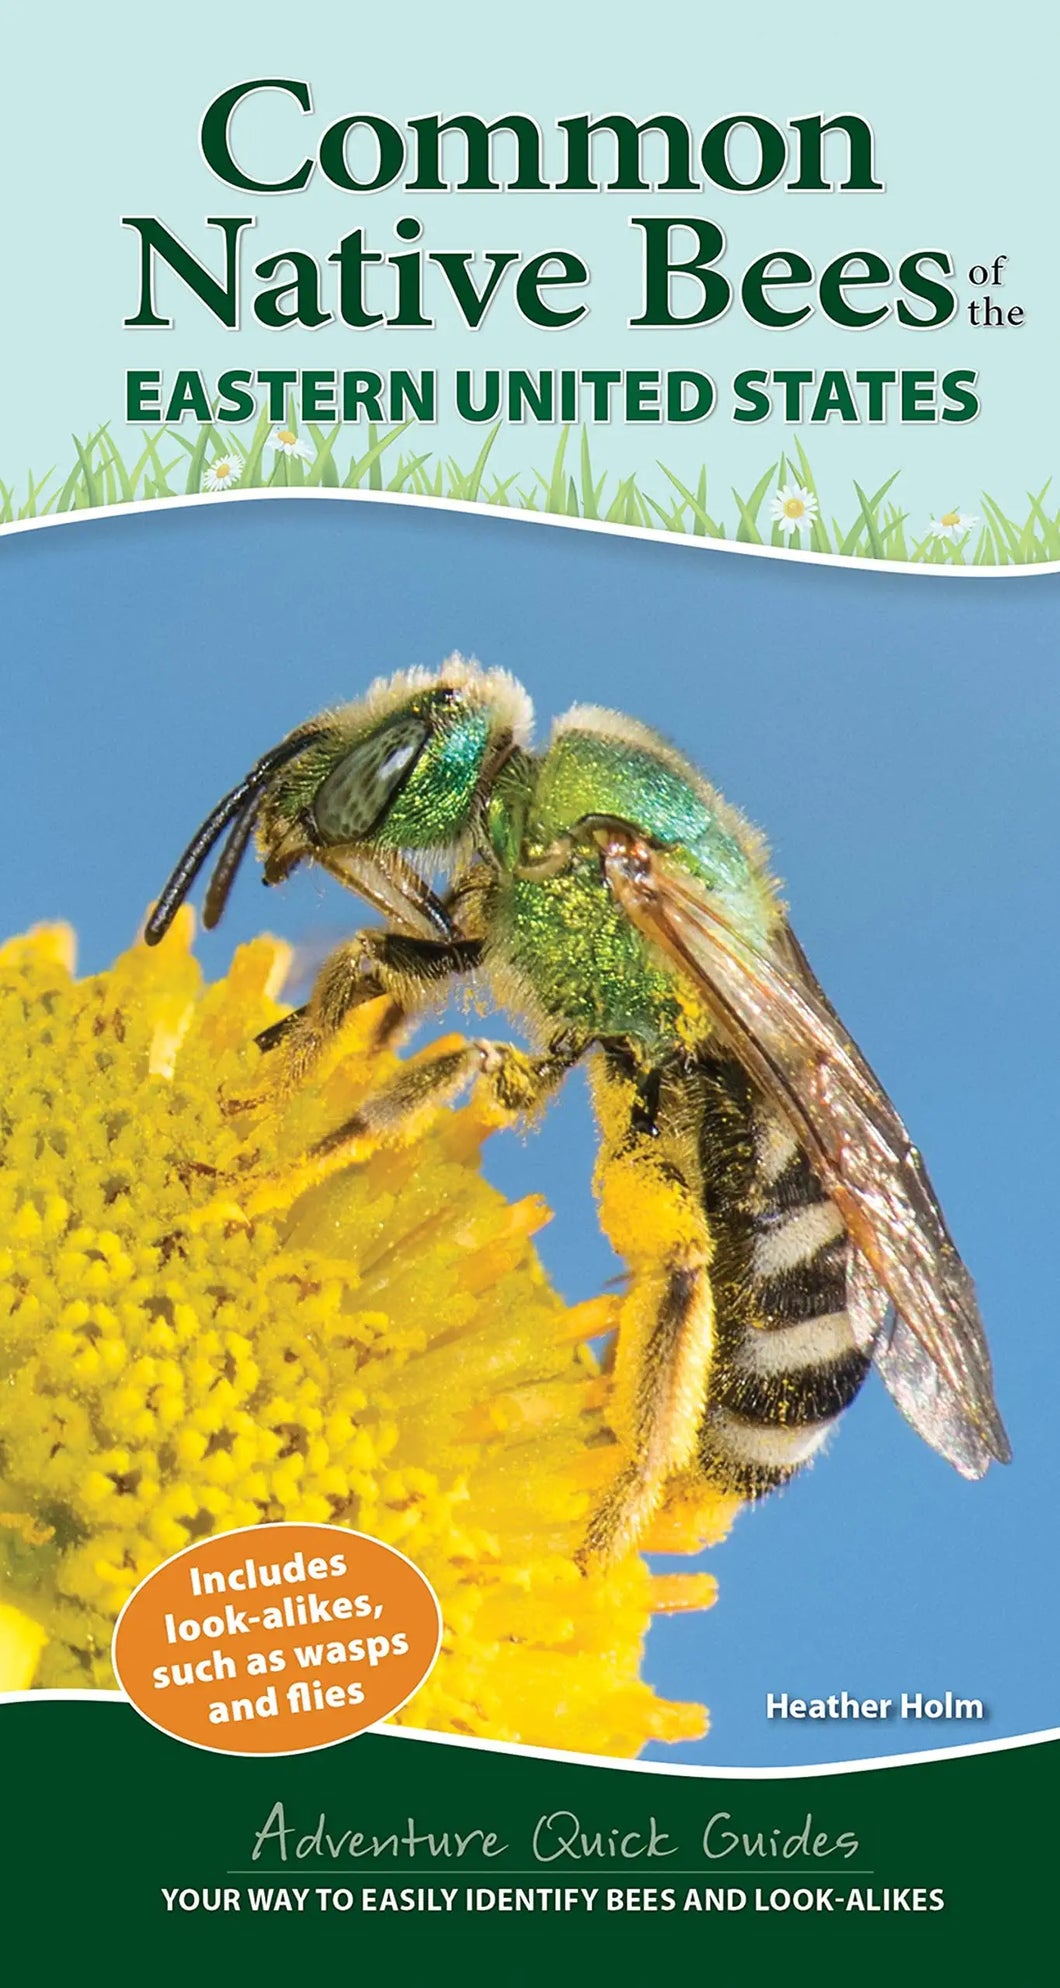 Common Native Bees of the Eastern United States - Quick Guide